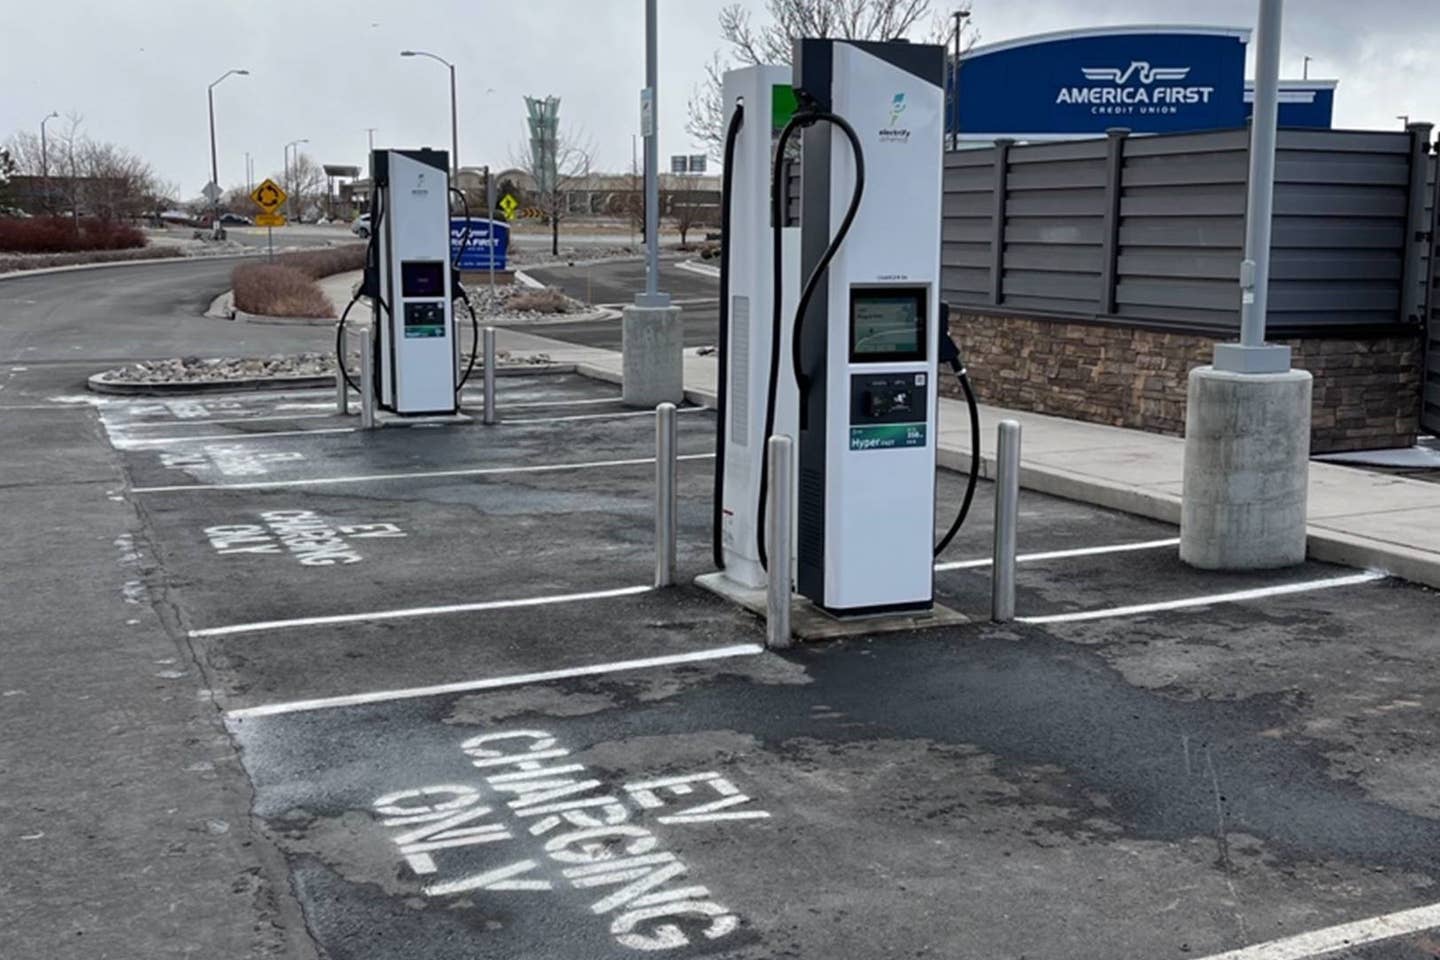 Upgraded Electrify America charging stall in Sparks, NV